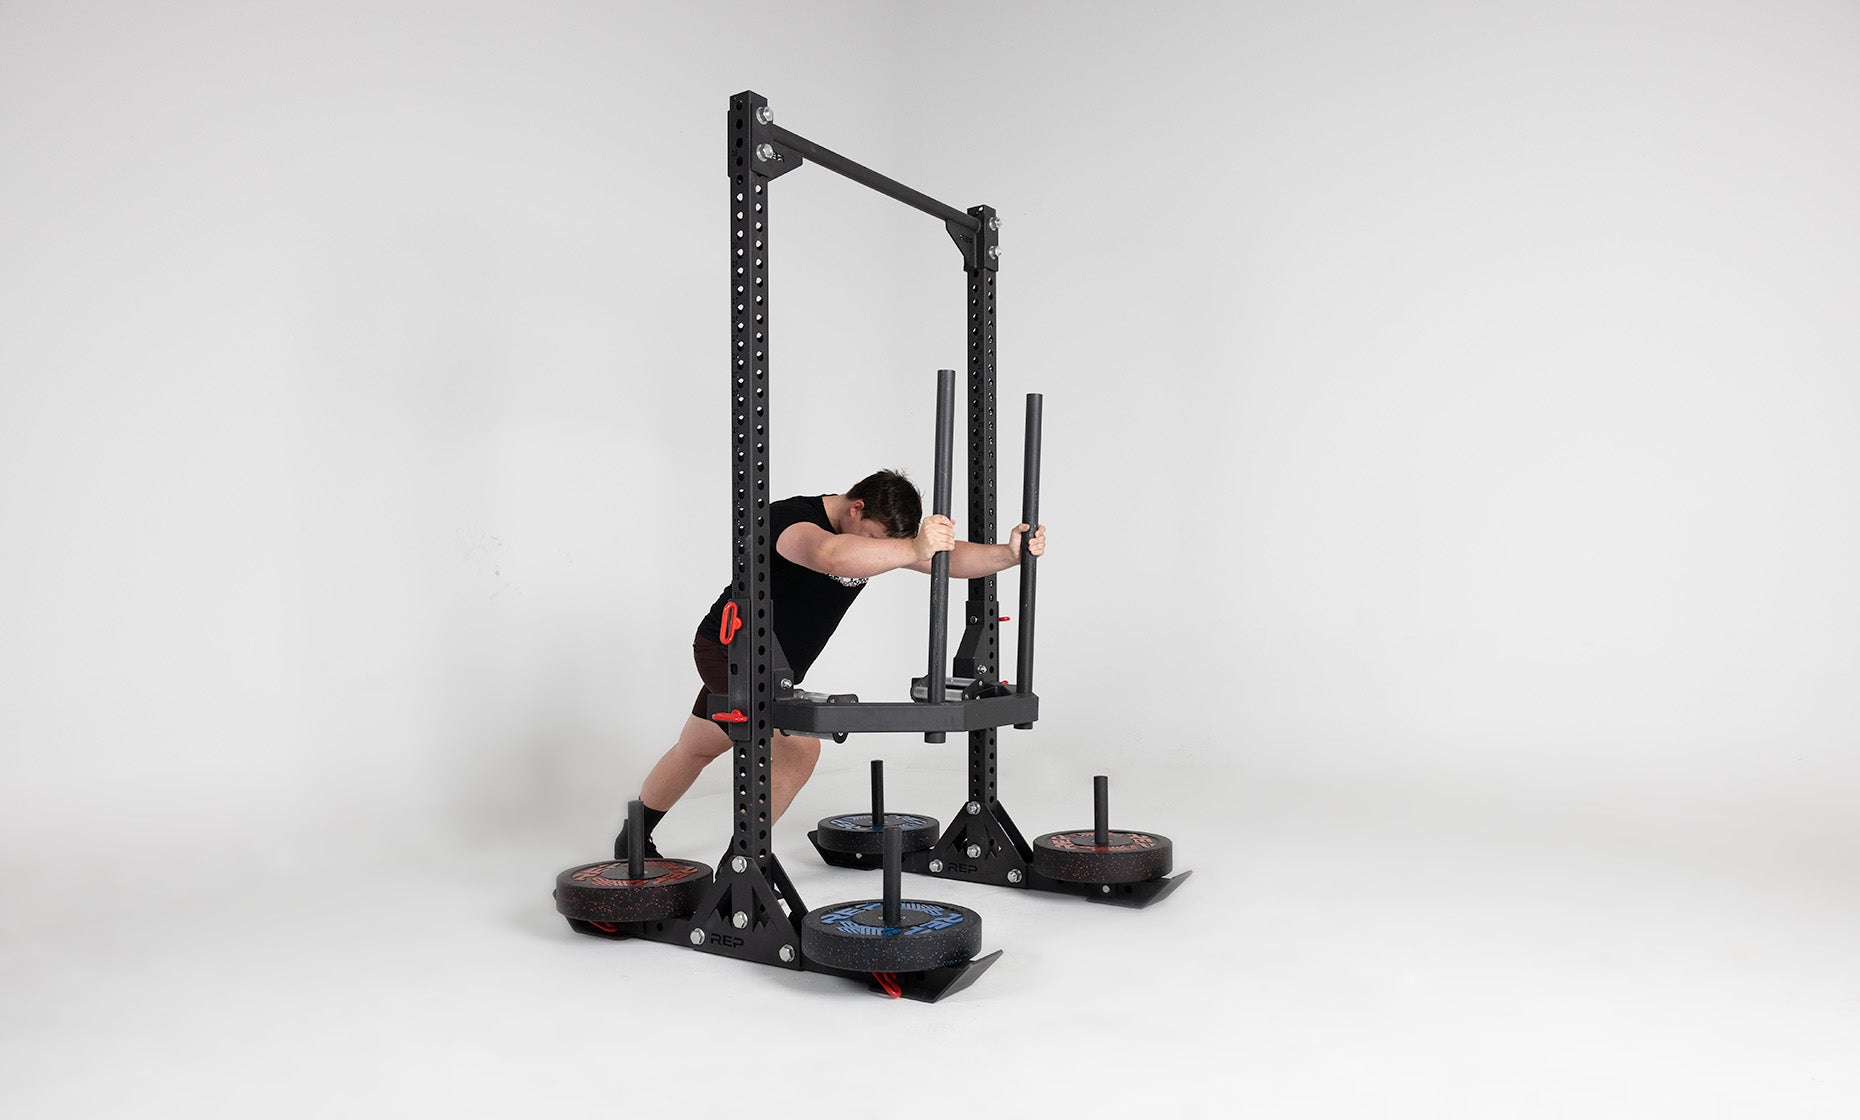 Oxylus Yoke With Carry Attachment and Pull-Up Bar Being Used for Sled Push